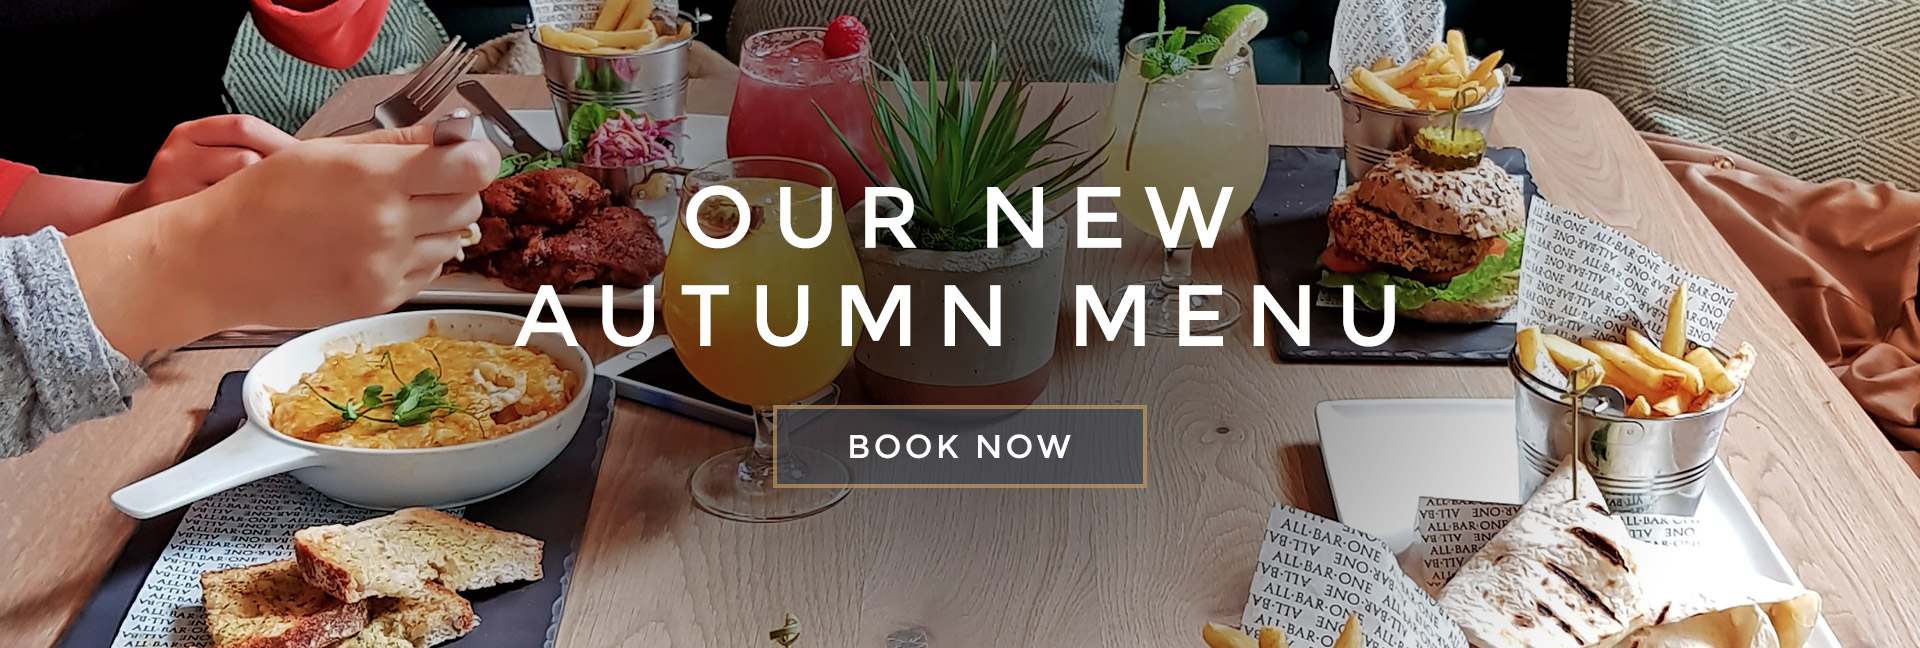 Our new Autumn menu at All Bar One Stratford Upon Avon - Book now